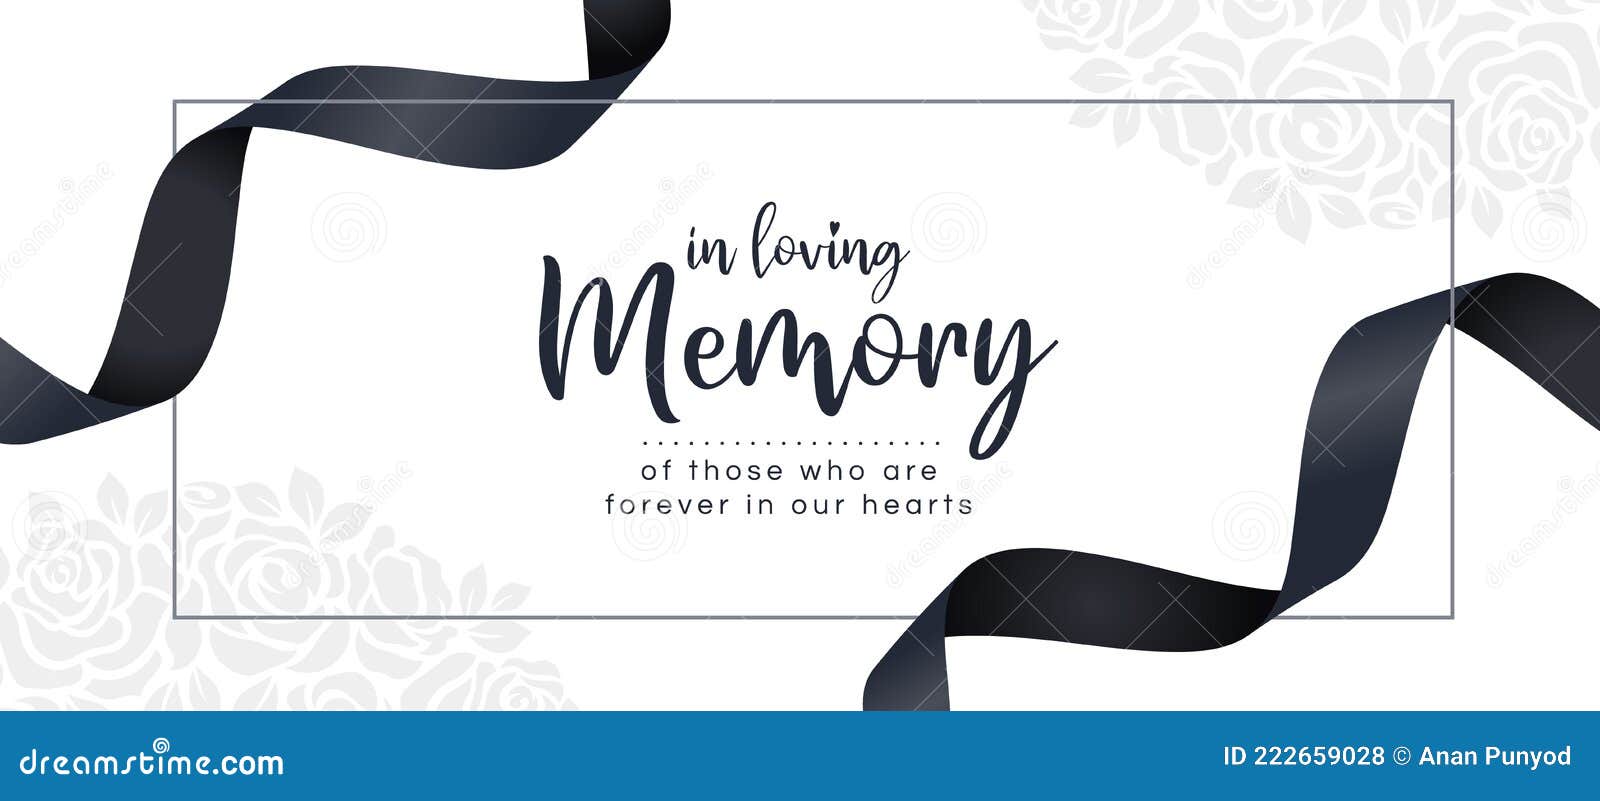 in loving memory of those who are forever in our hearts text and black ribbon roll wave around frame on white rose texture